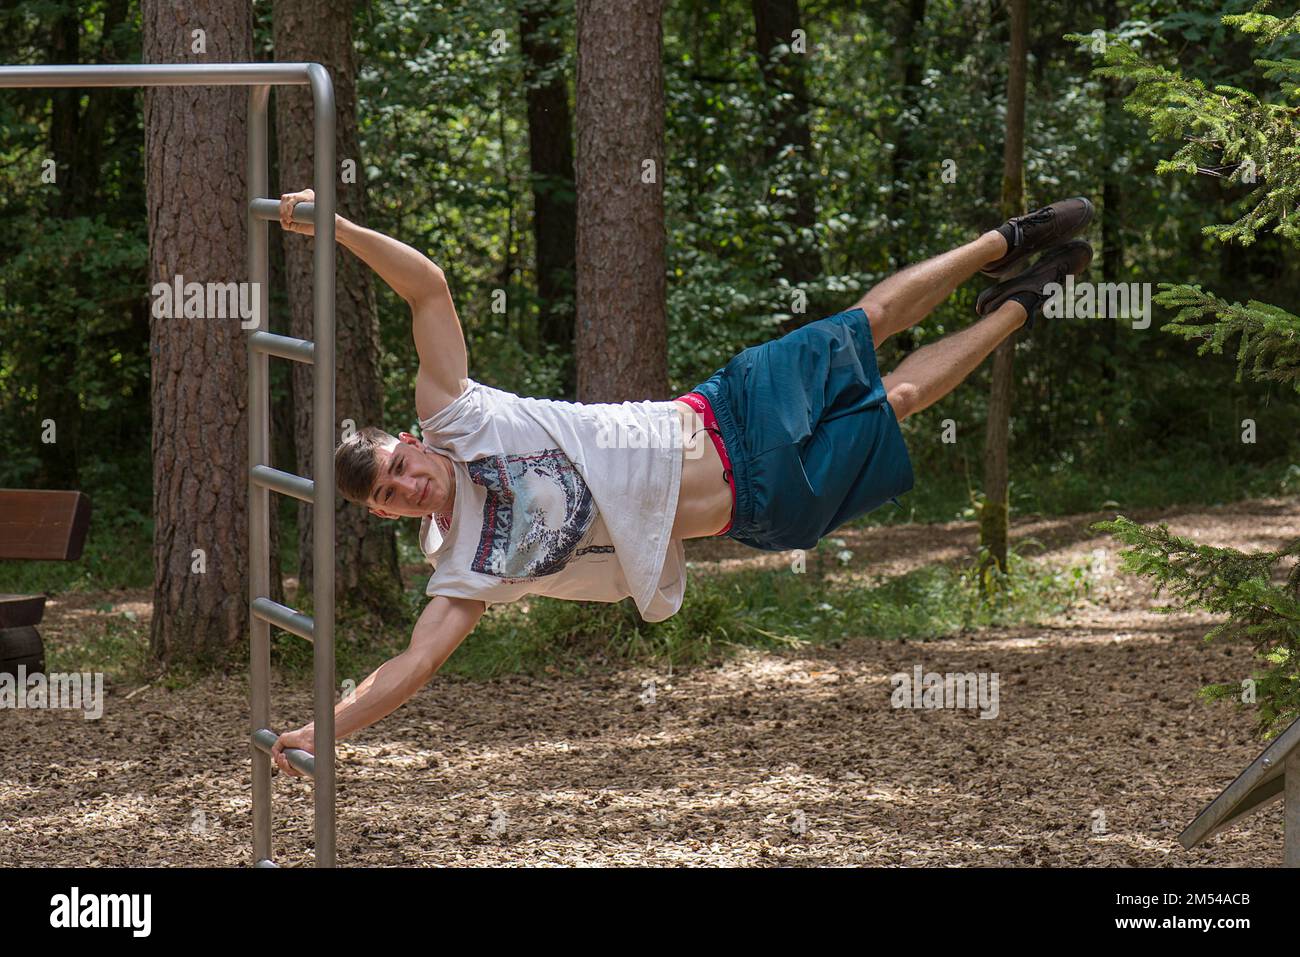 Human Flag, Young Man on a Fitness Course, Bayerm Germany Stock Photo